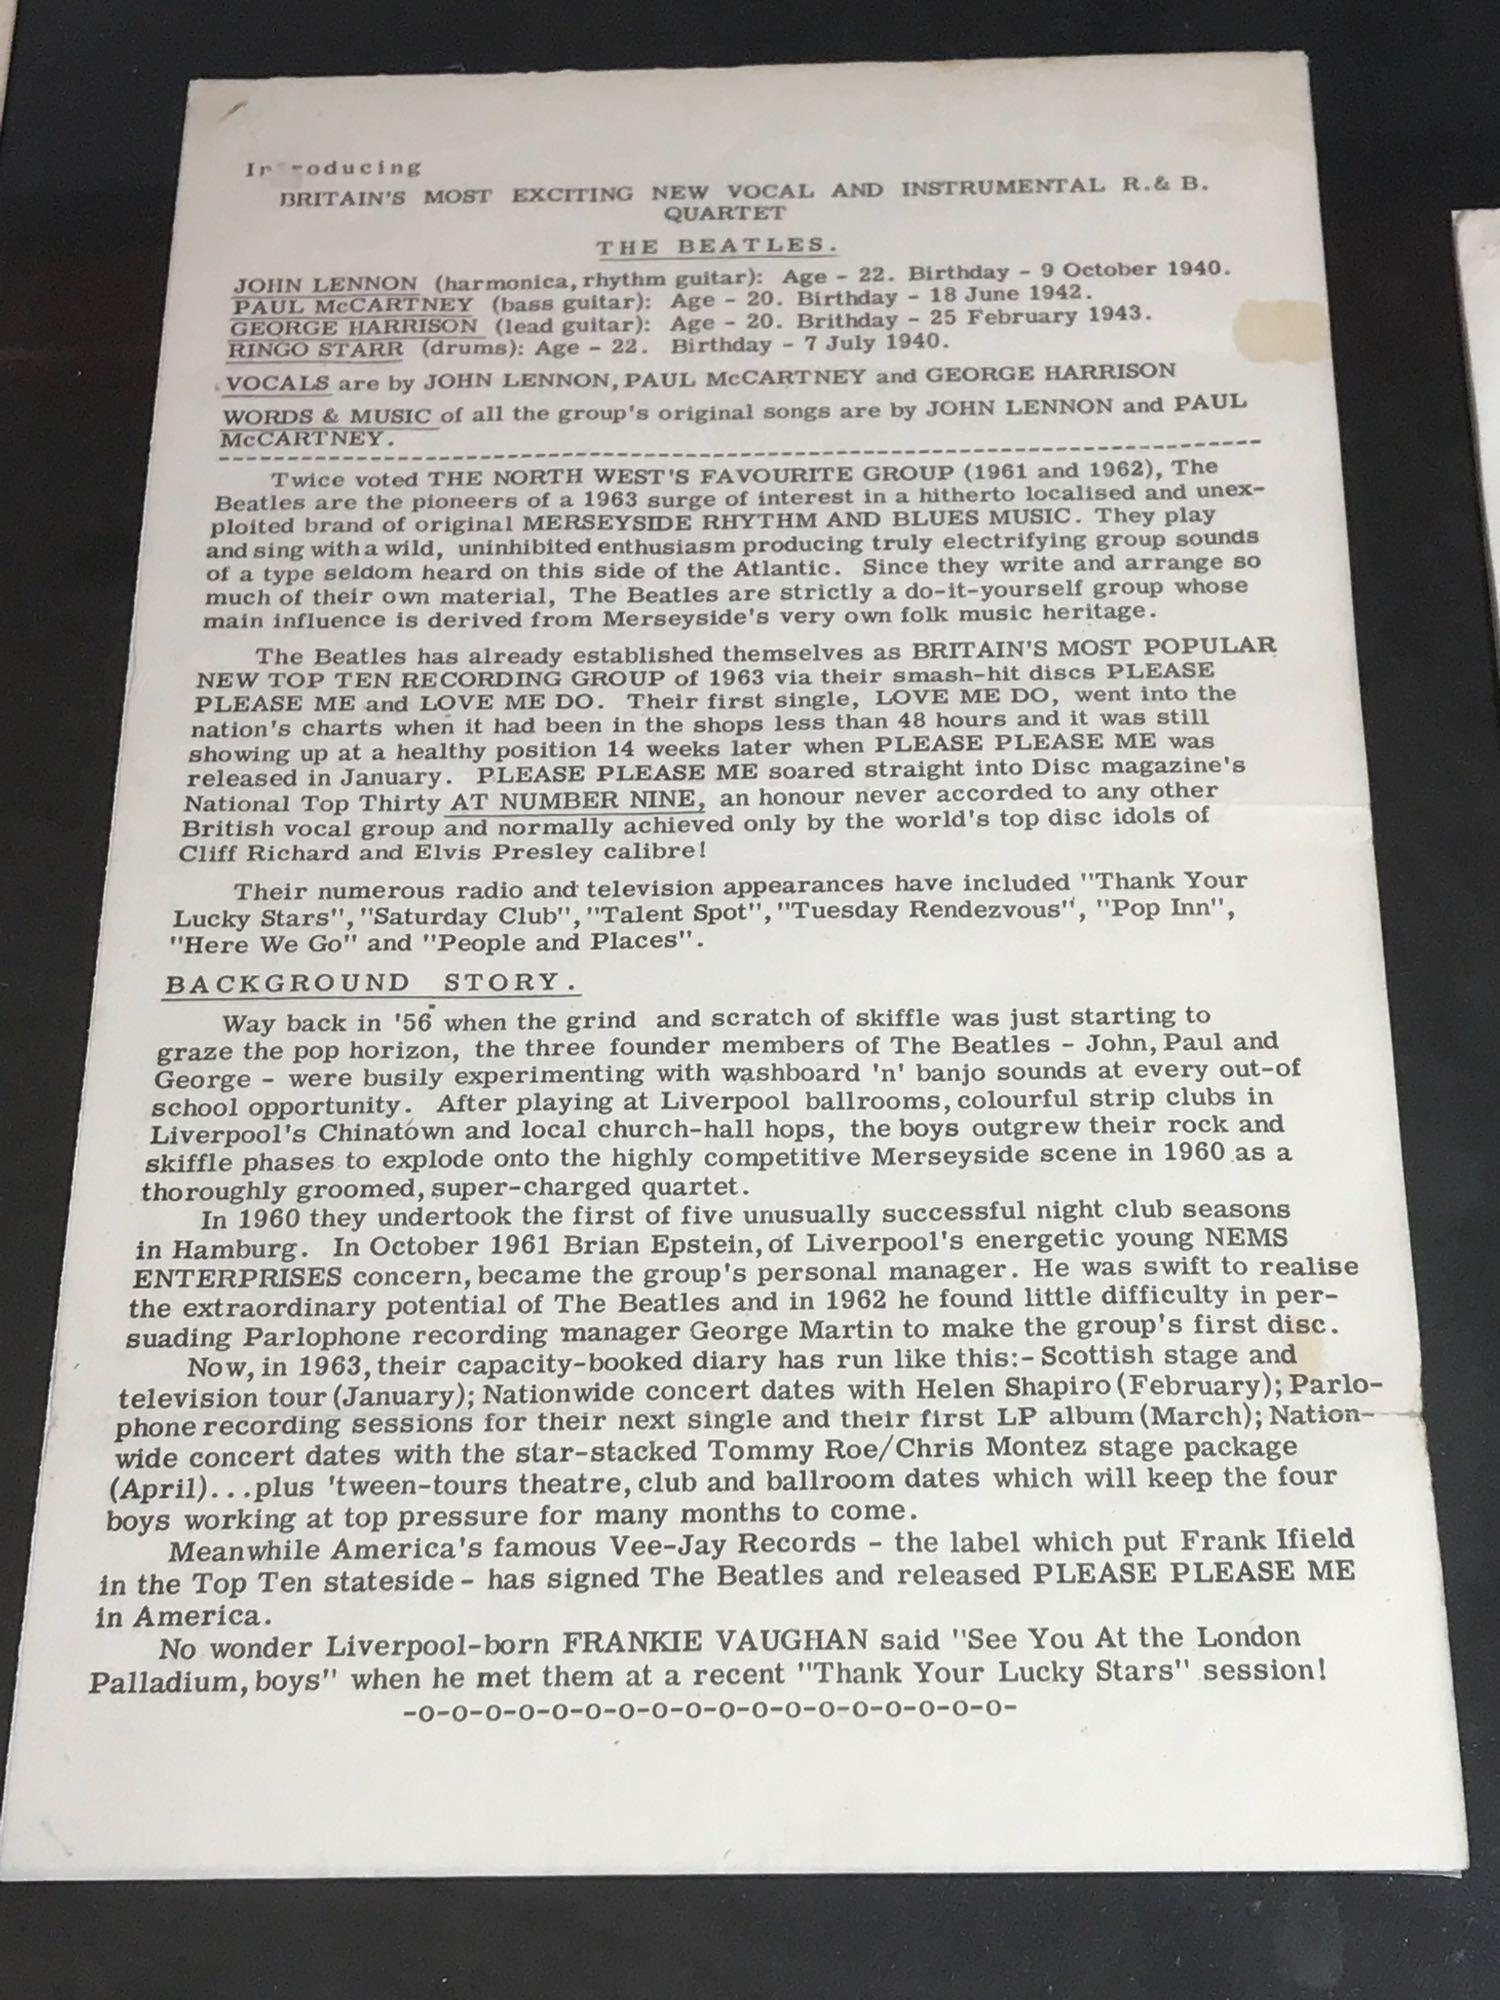 The Beatles Pamplets Handed Out To Journalist Before a Show Framed